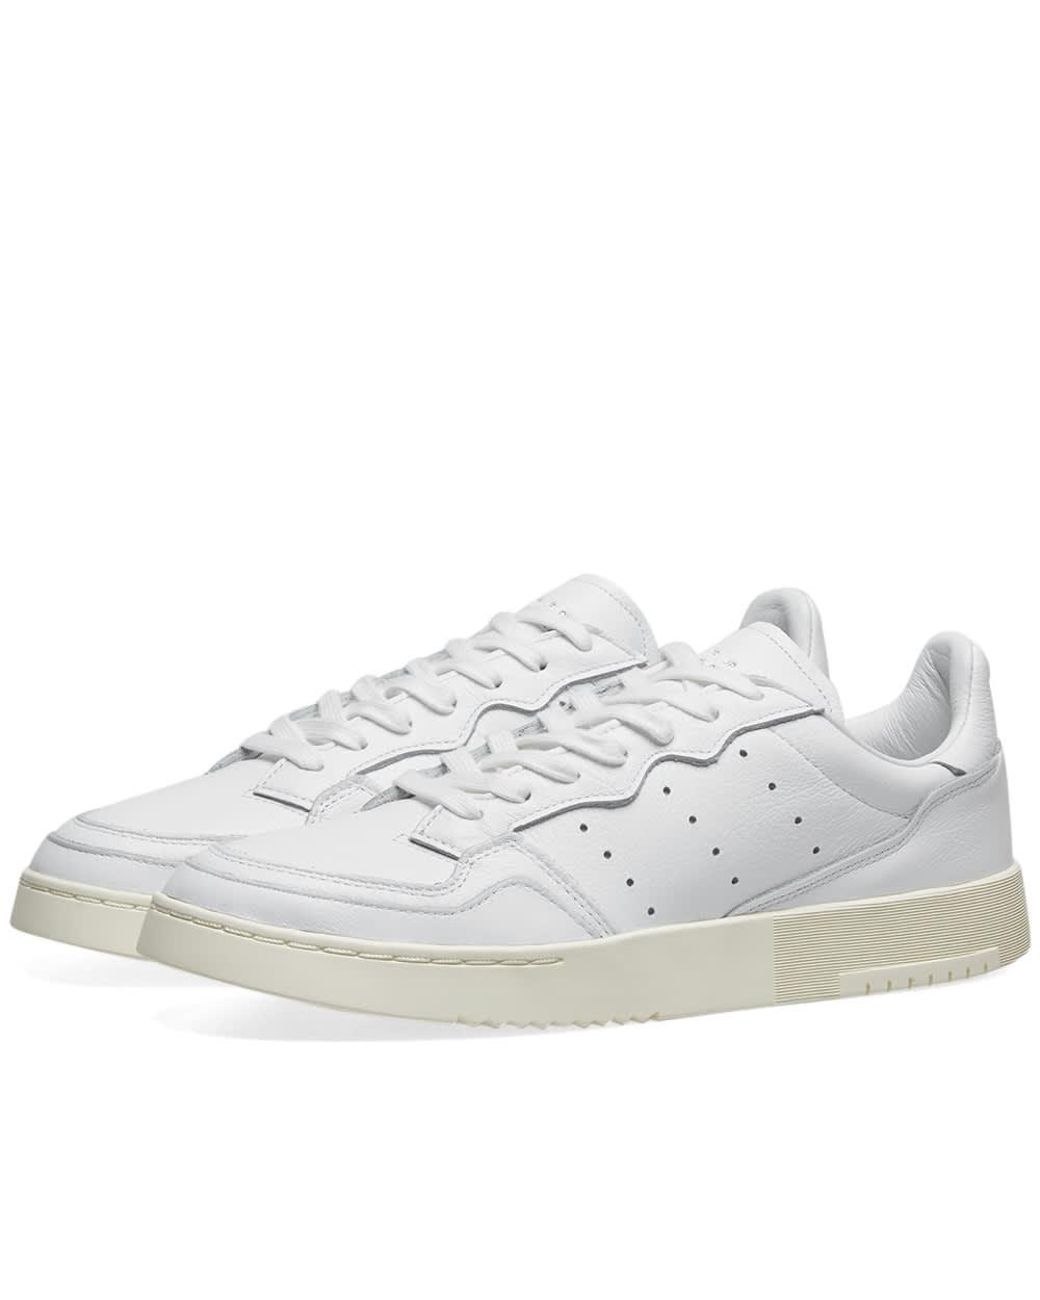 adidas Supercourt in White for Men - Lyst